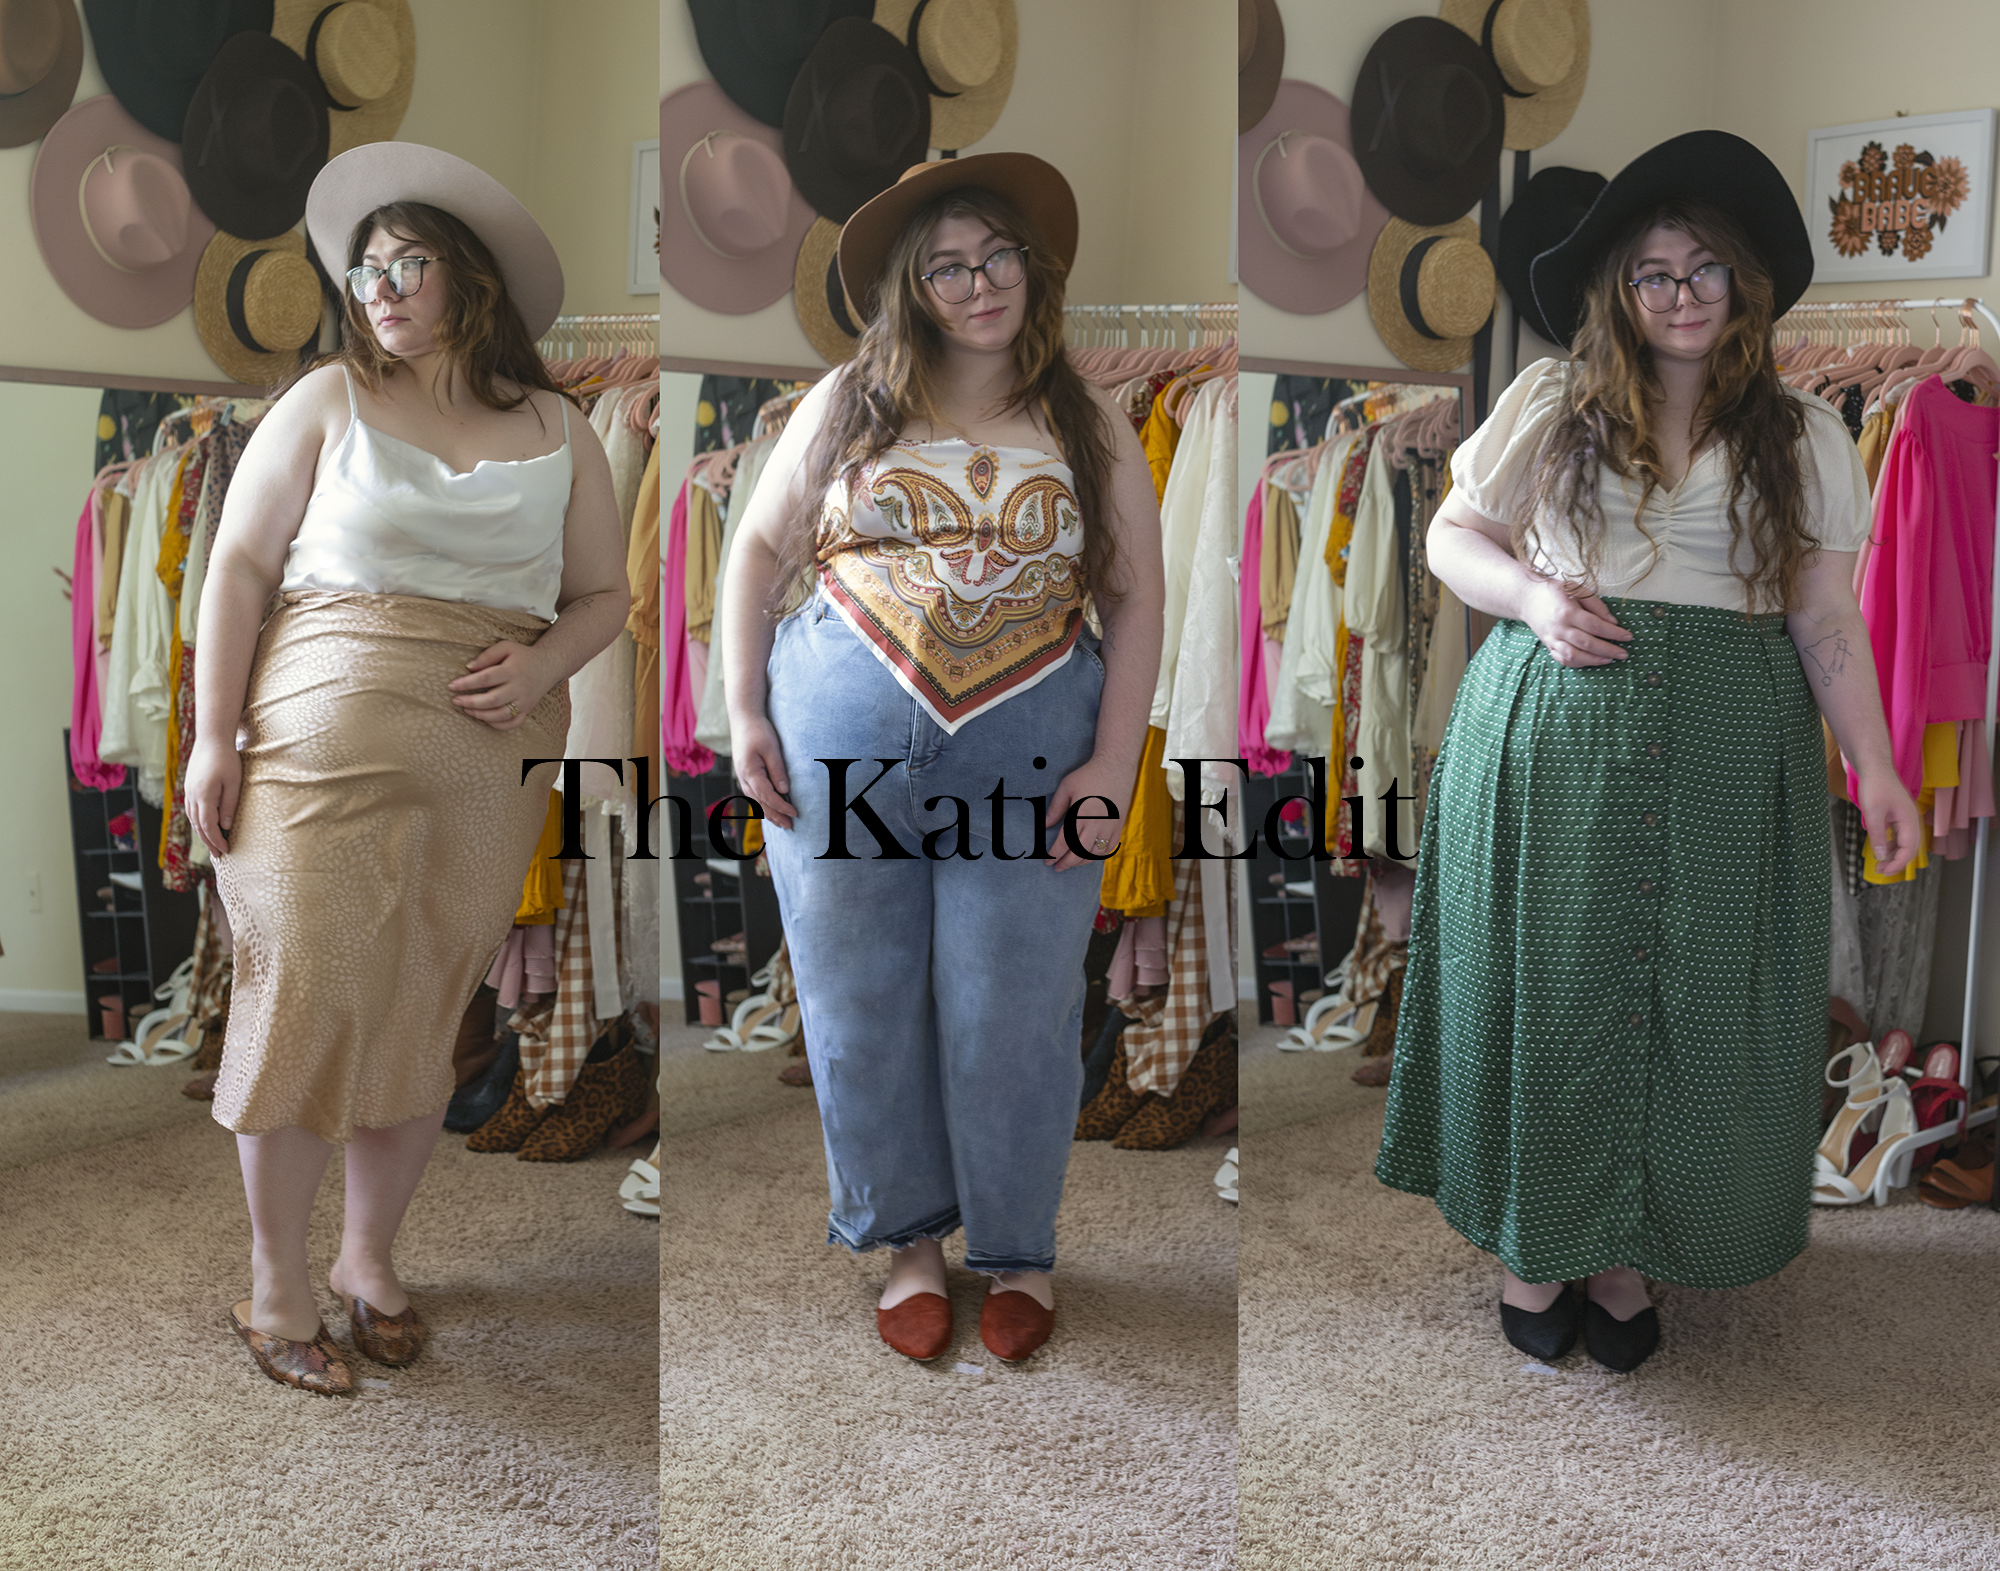 3 More Outfits with Hats!, a lookbook by Katie Selt for The Katie Edit www.thekatieedit.com